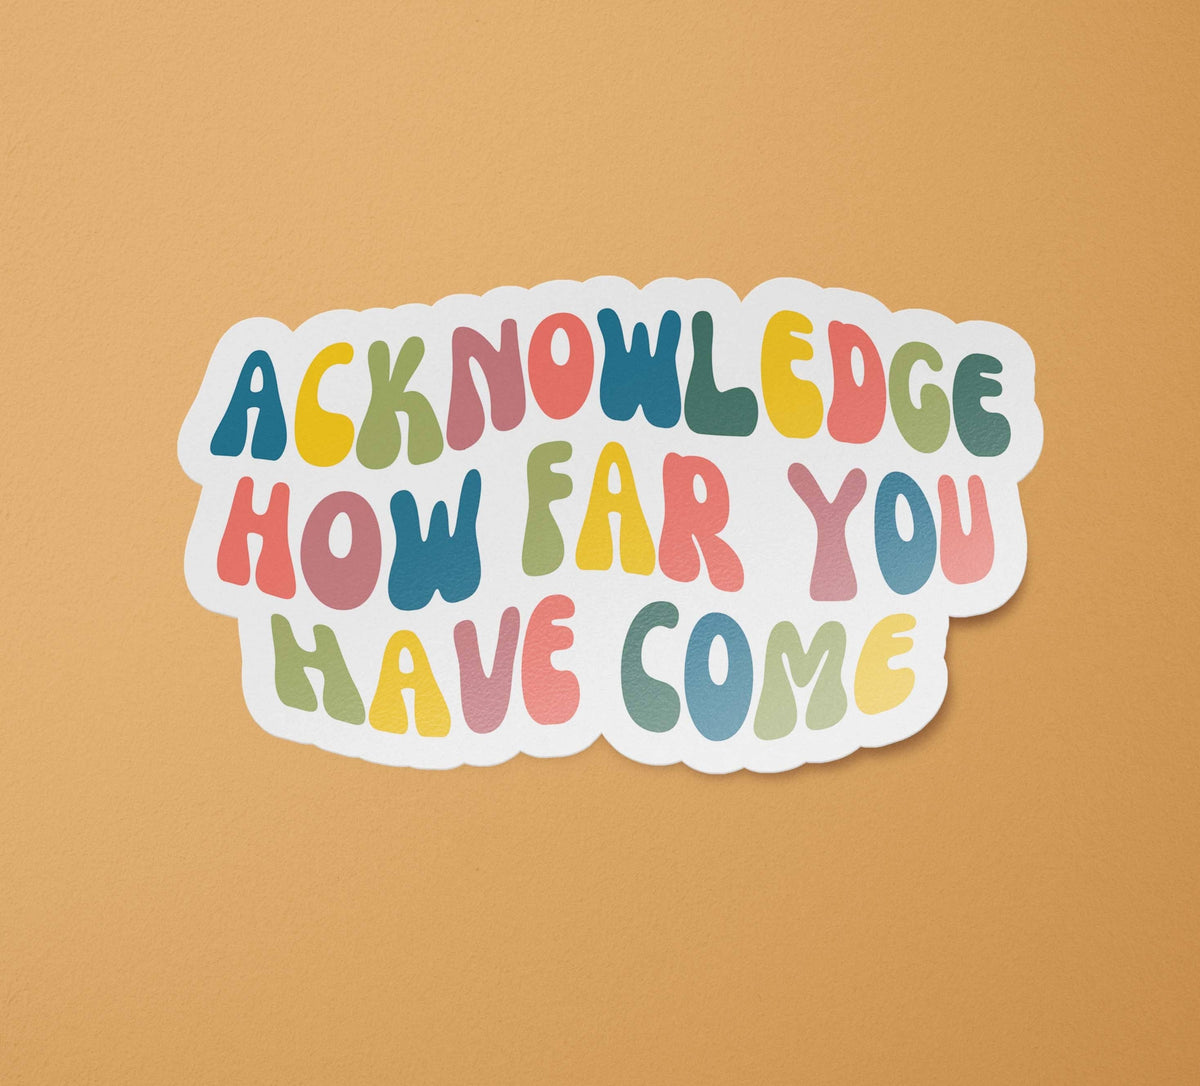 Acknowledge How Far You Have Come Sticker